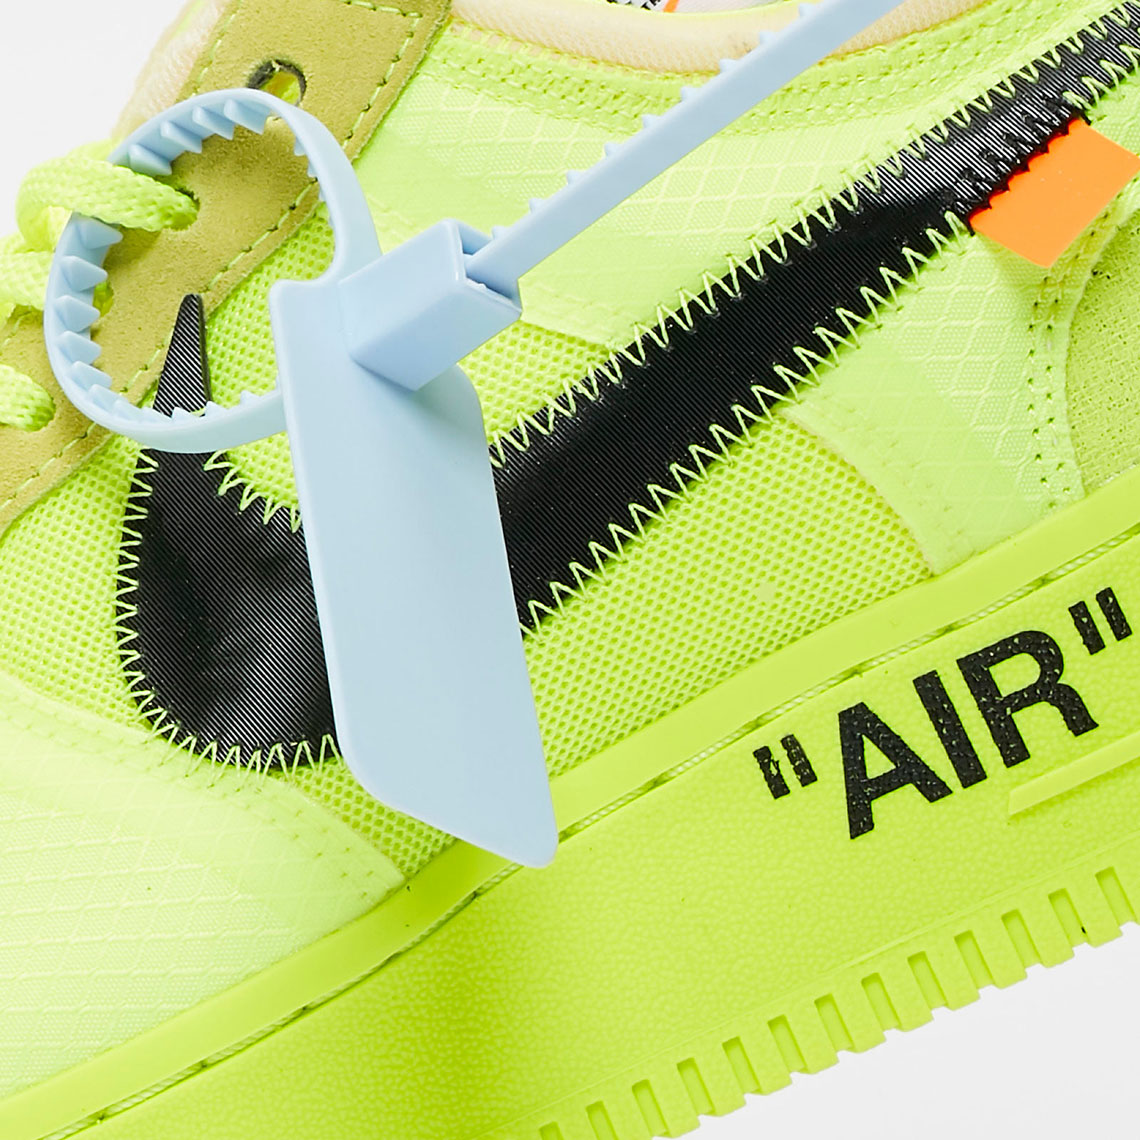 Air Force 1 Off White Volt ⚡️ No more words needed 💣 . #perfectsneake